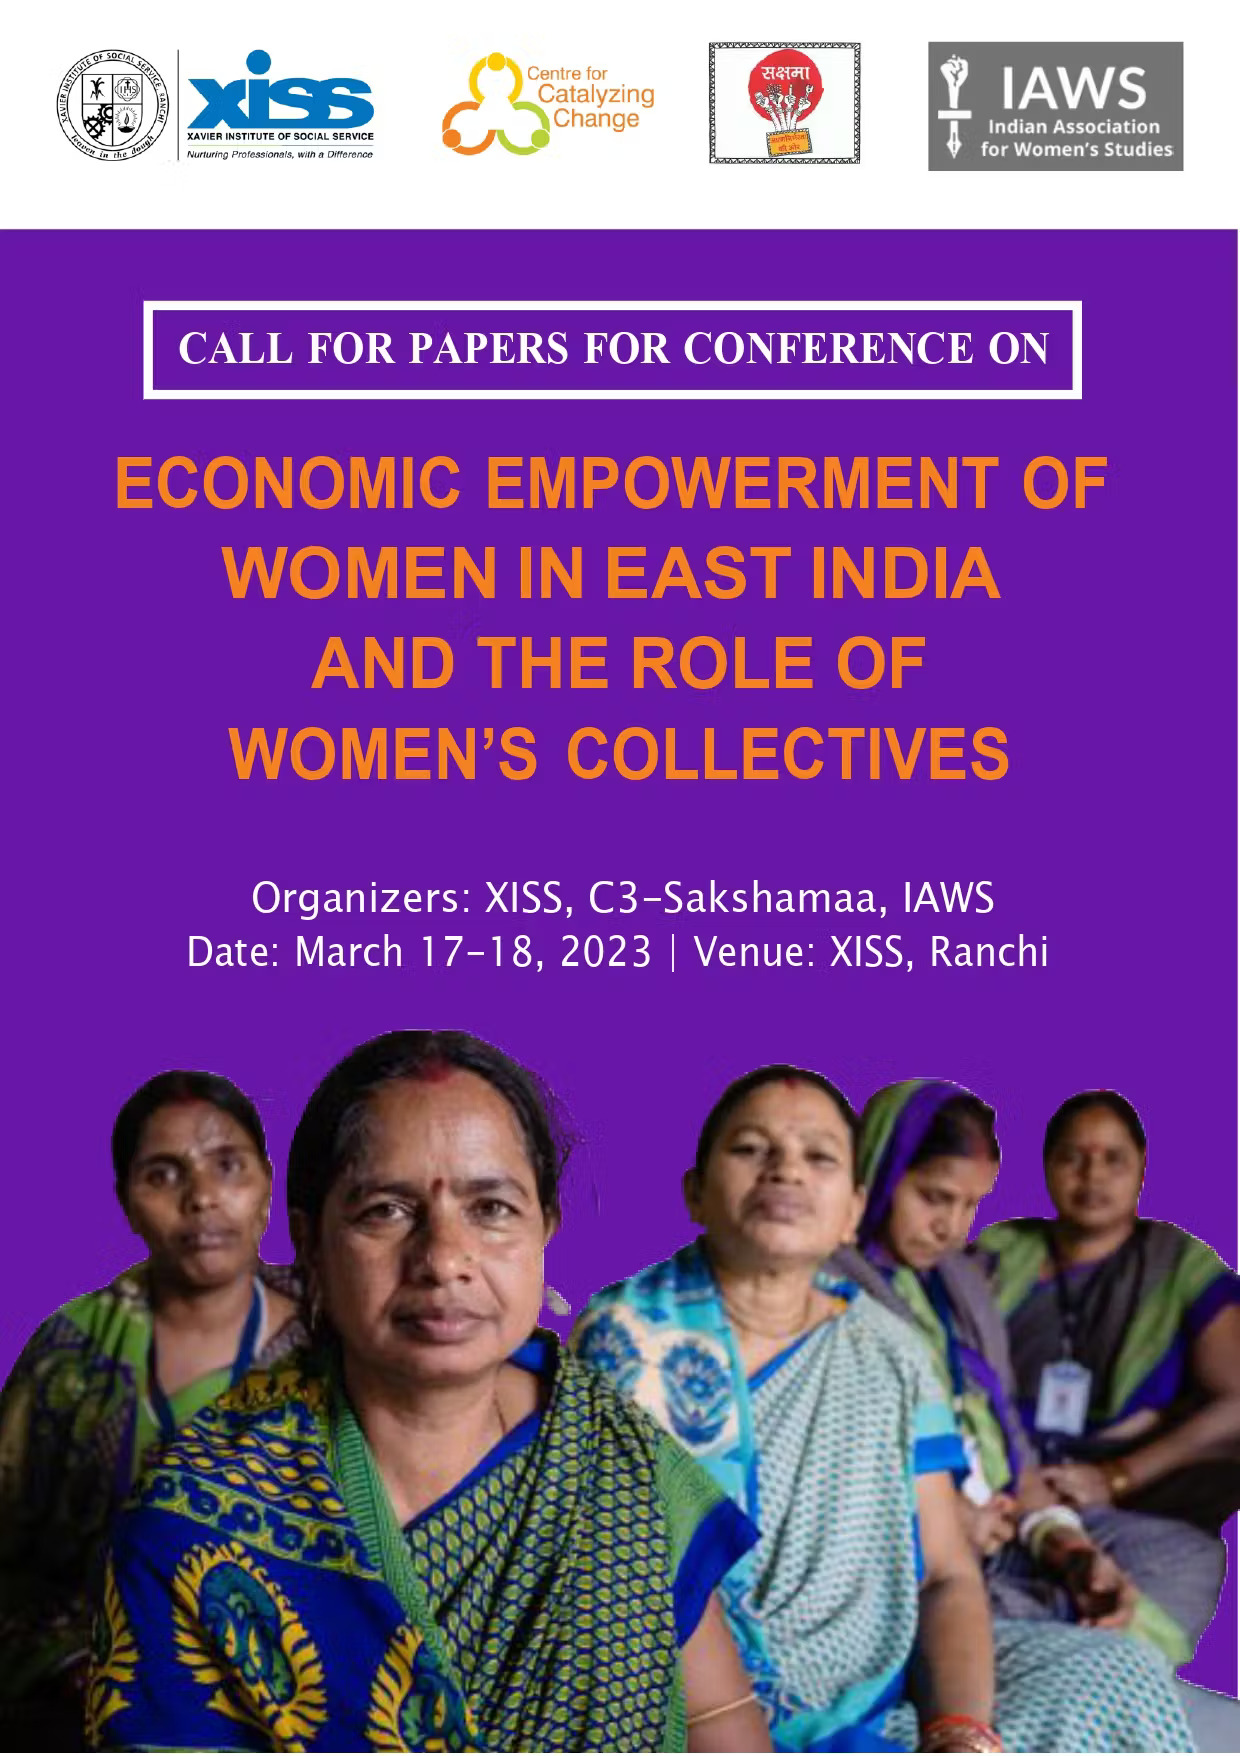 Economic empowerment of women in East India and Women's Collectives